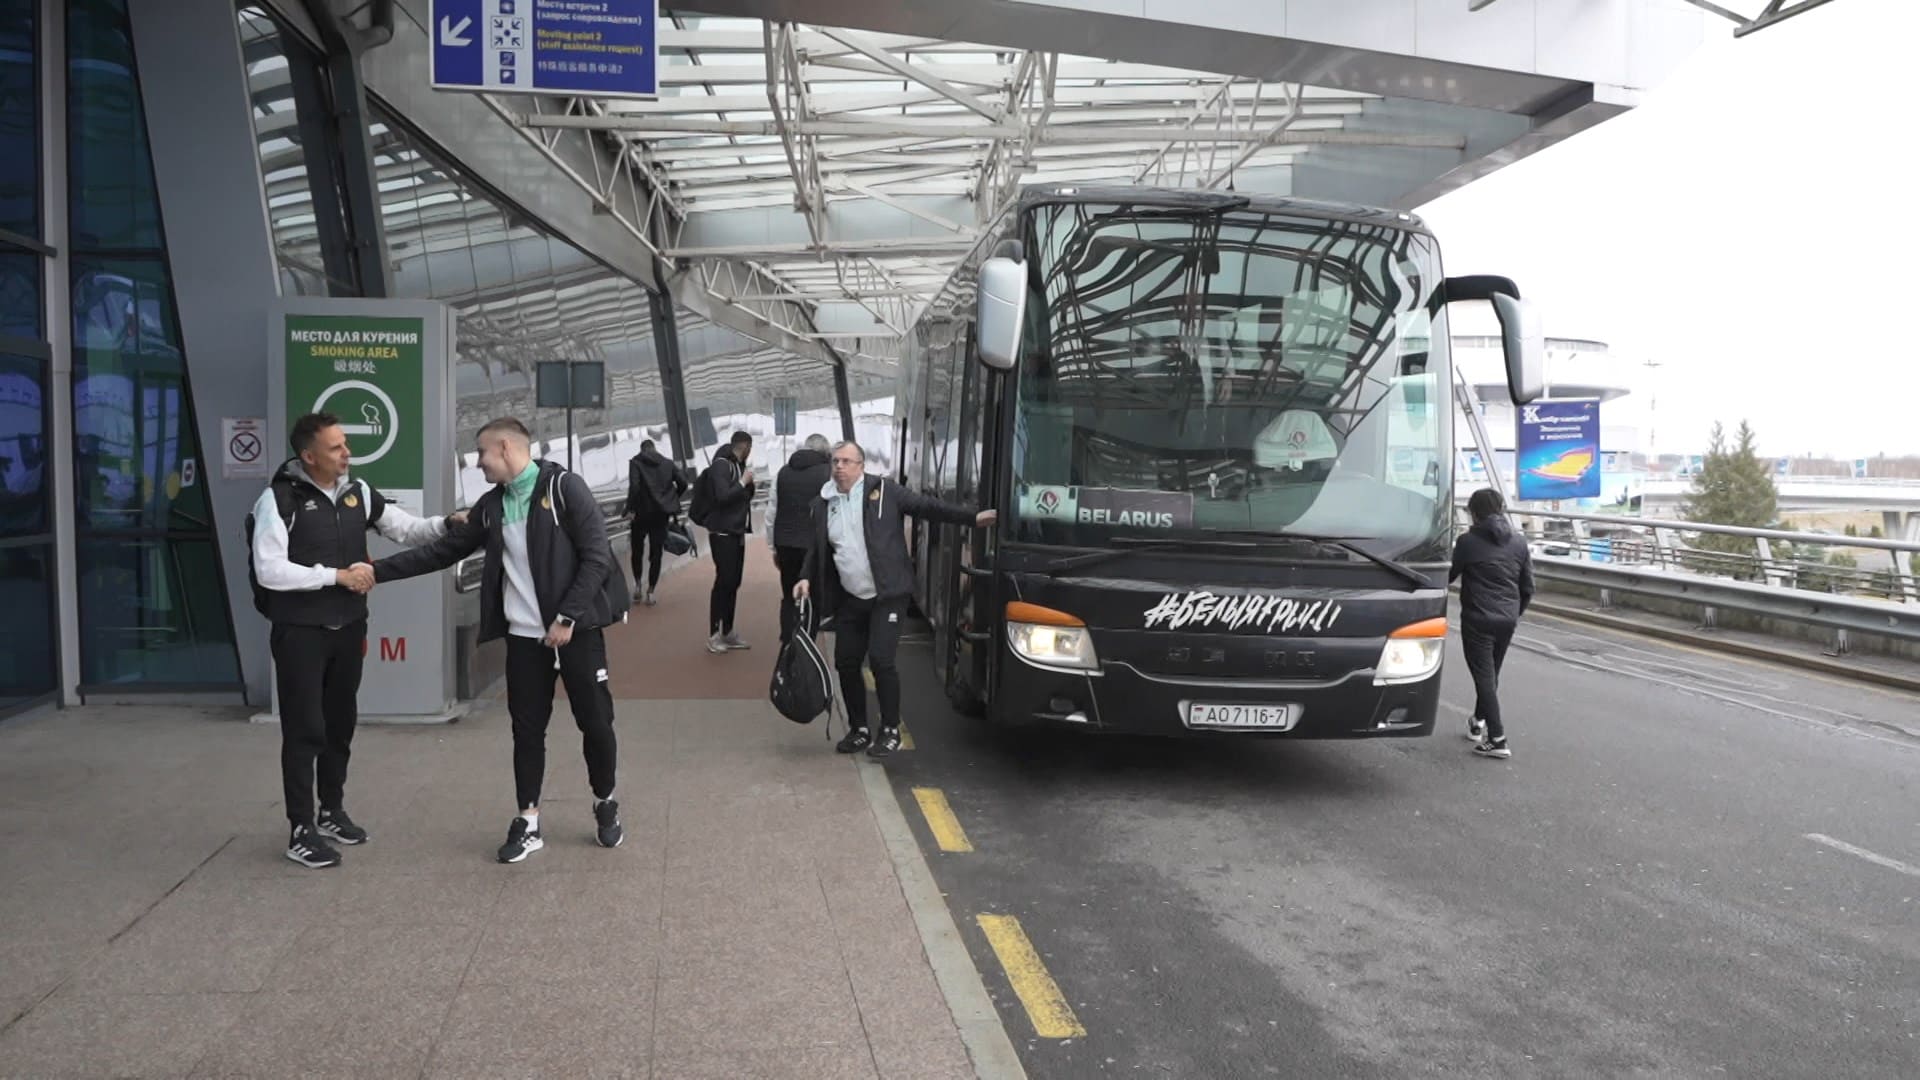 Belarus national football team goes to international friendly matches